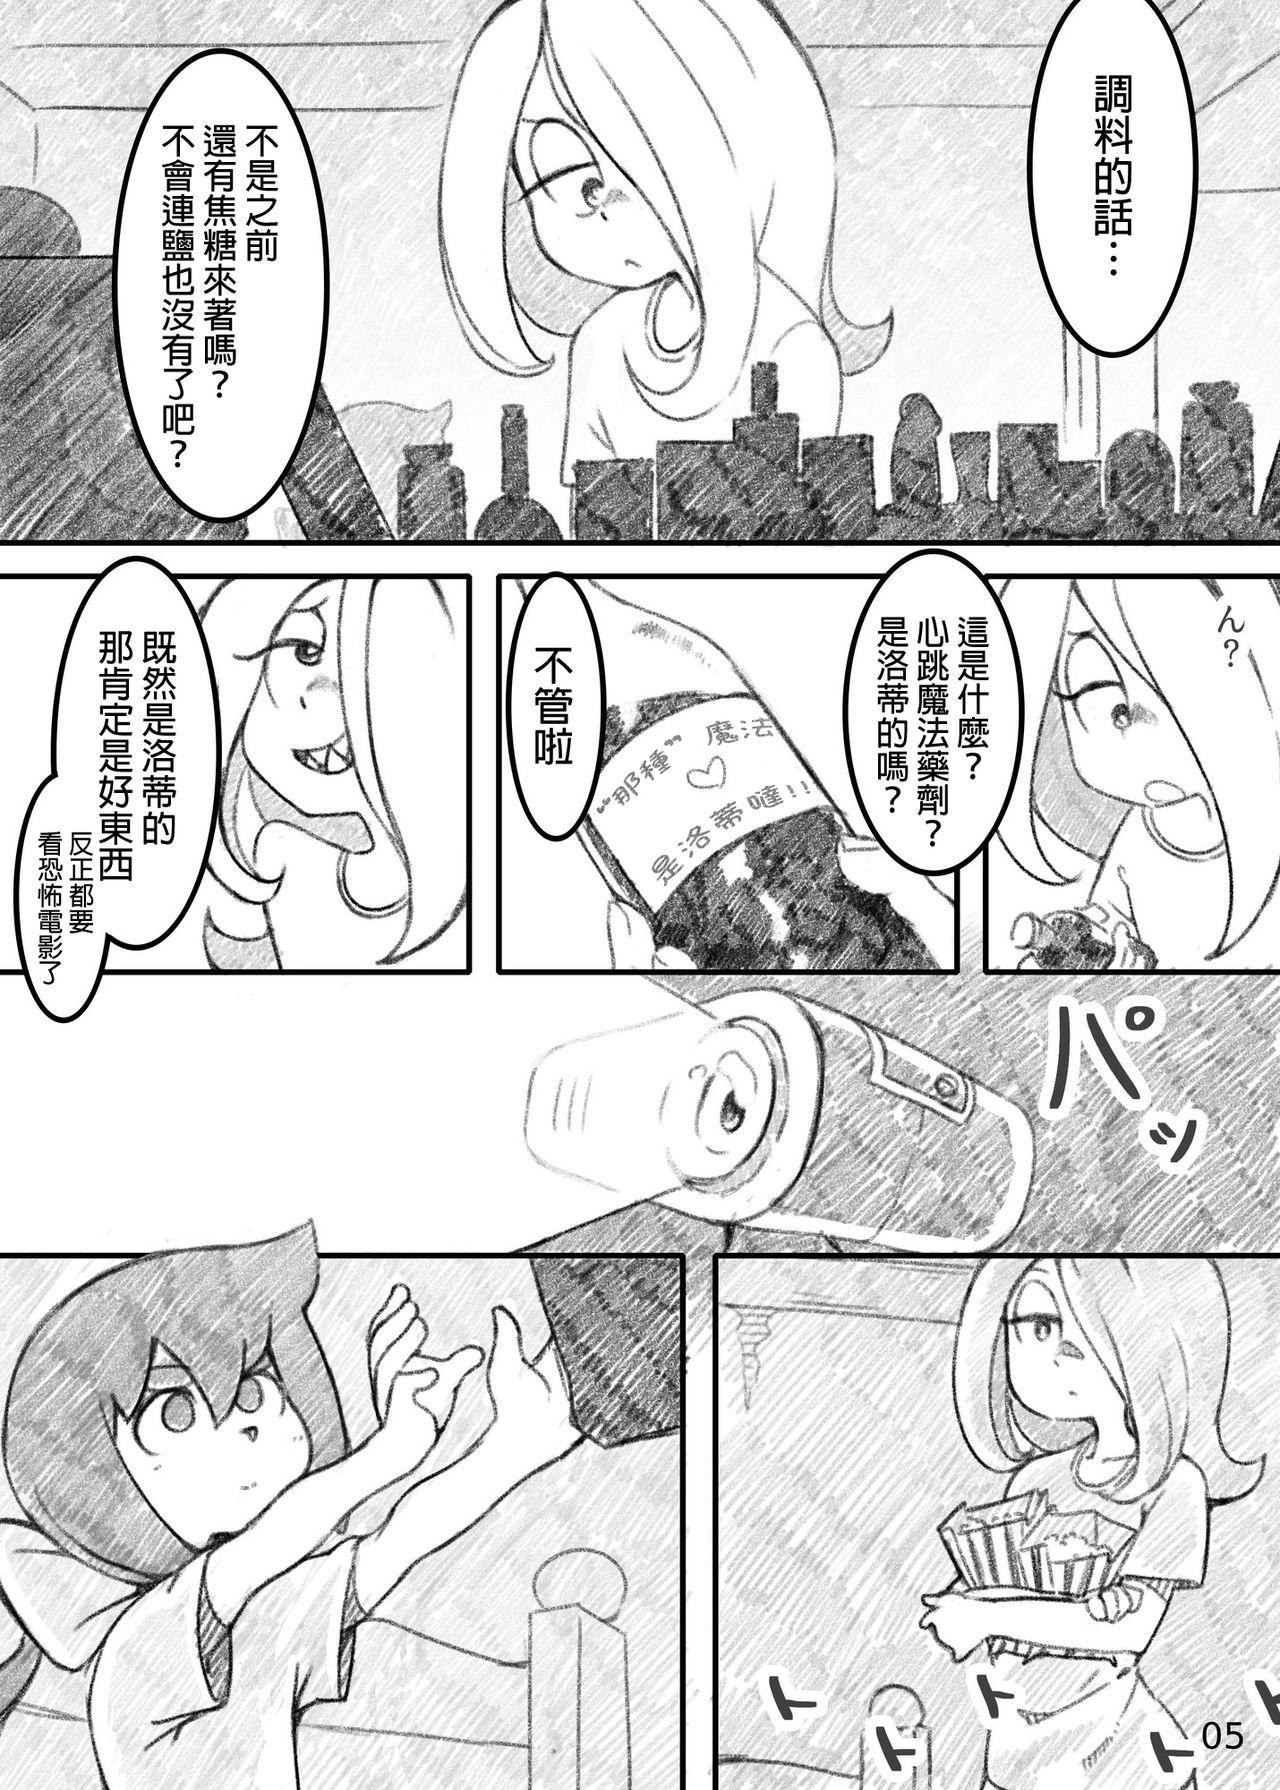 Jerk Off Instruction Movie Night - Little witch academia Housewife - Page 5